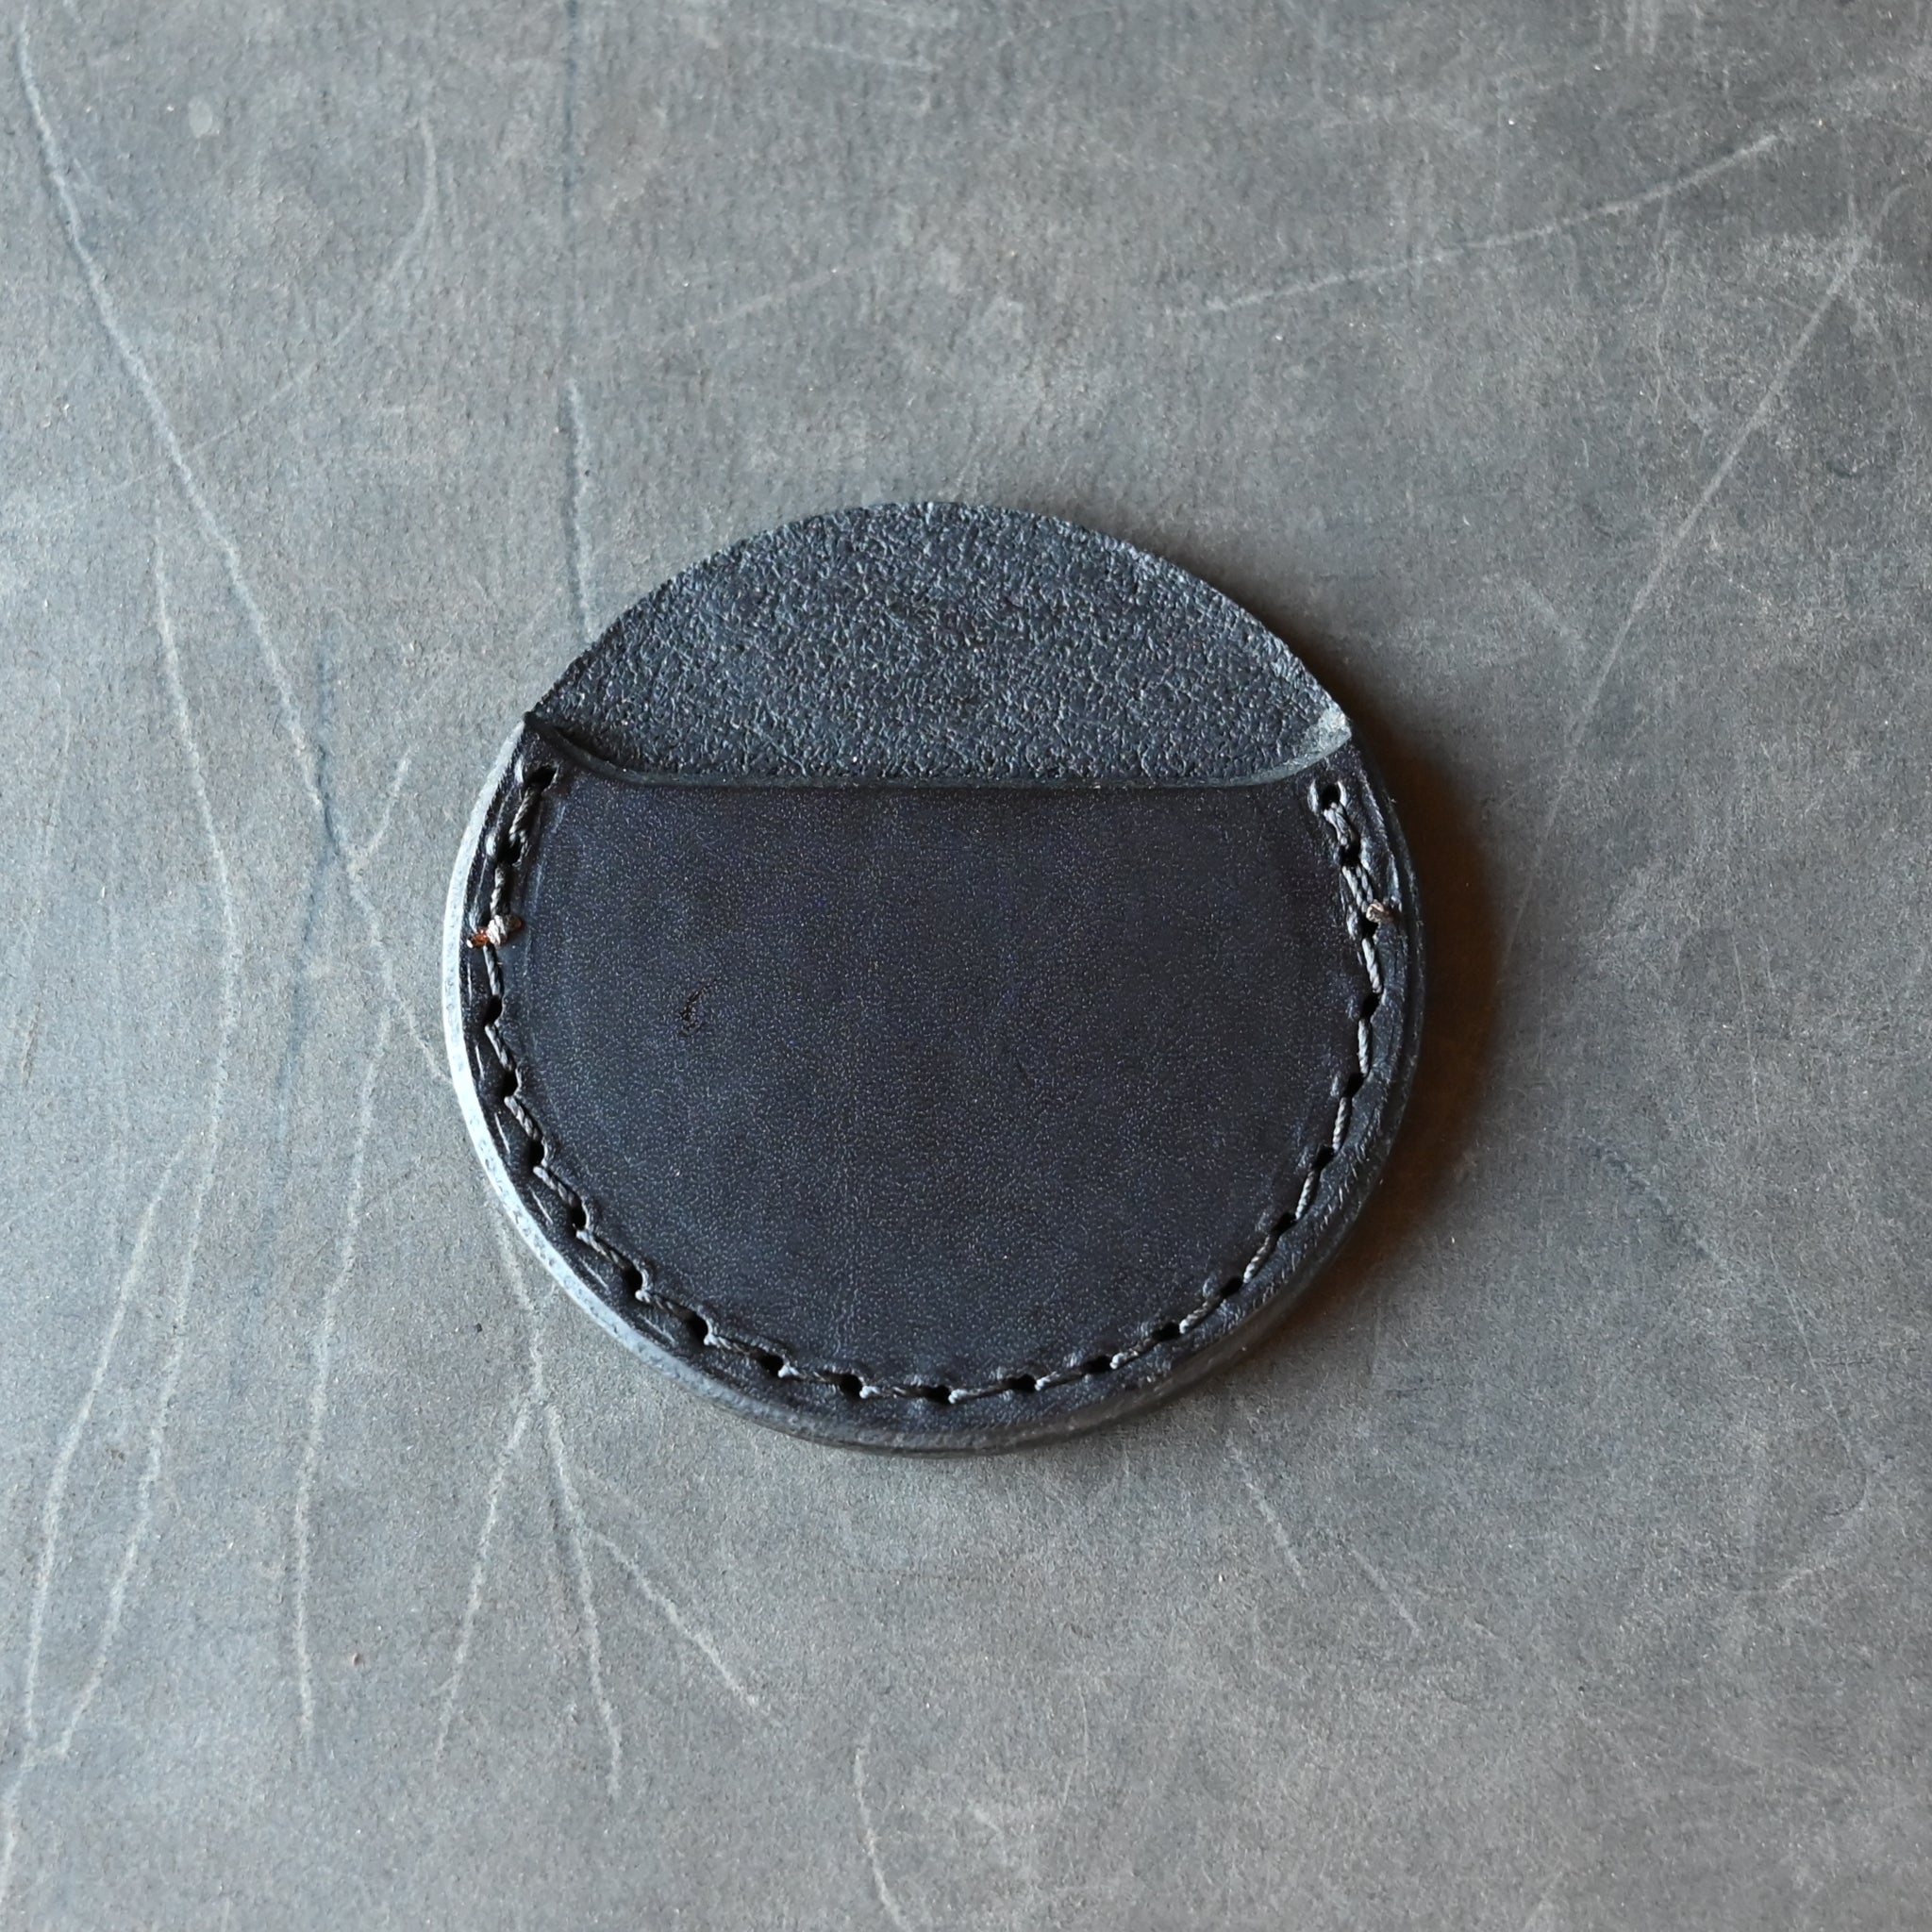 Leather Coin Slips